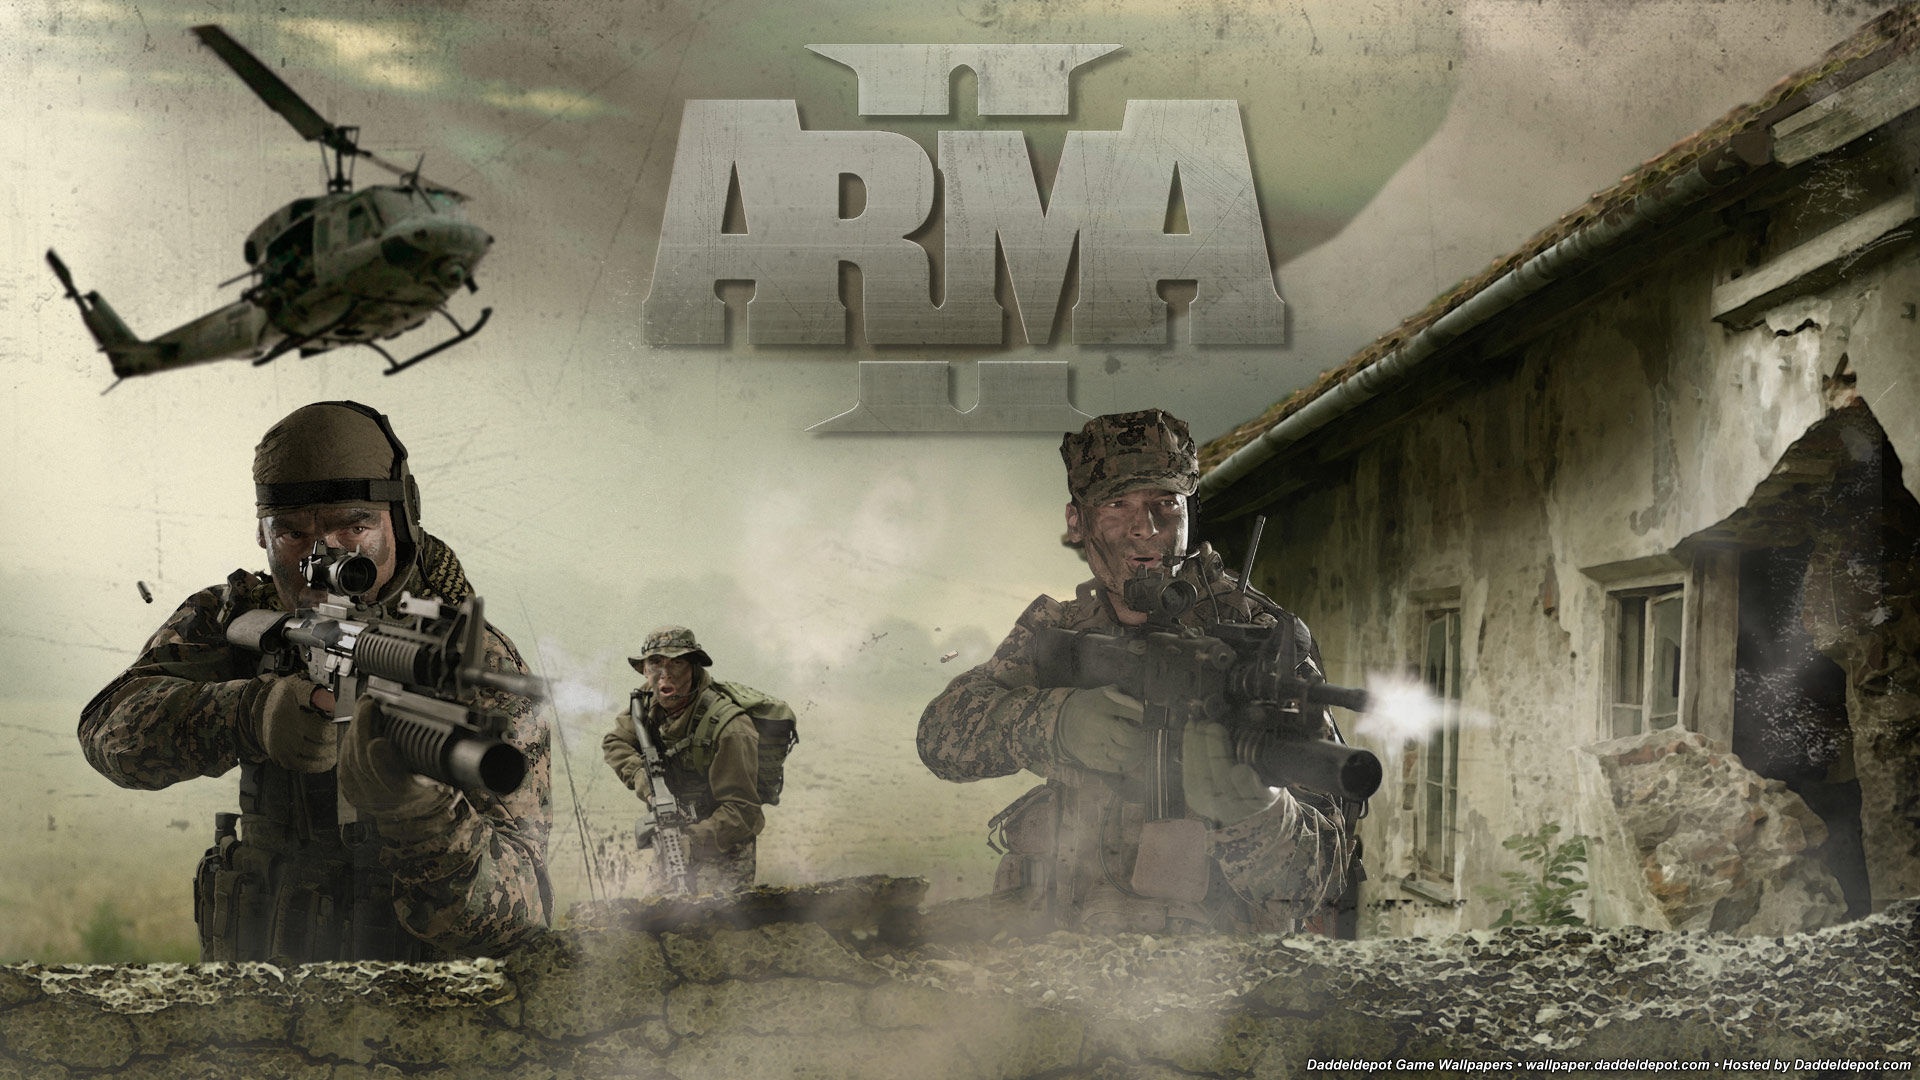 Video Game ARMA 2 HD Wallpaper | Background Image